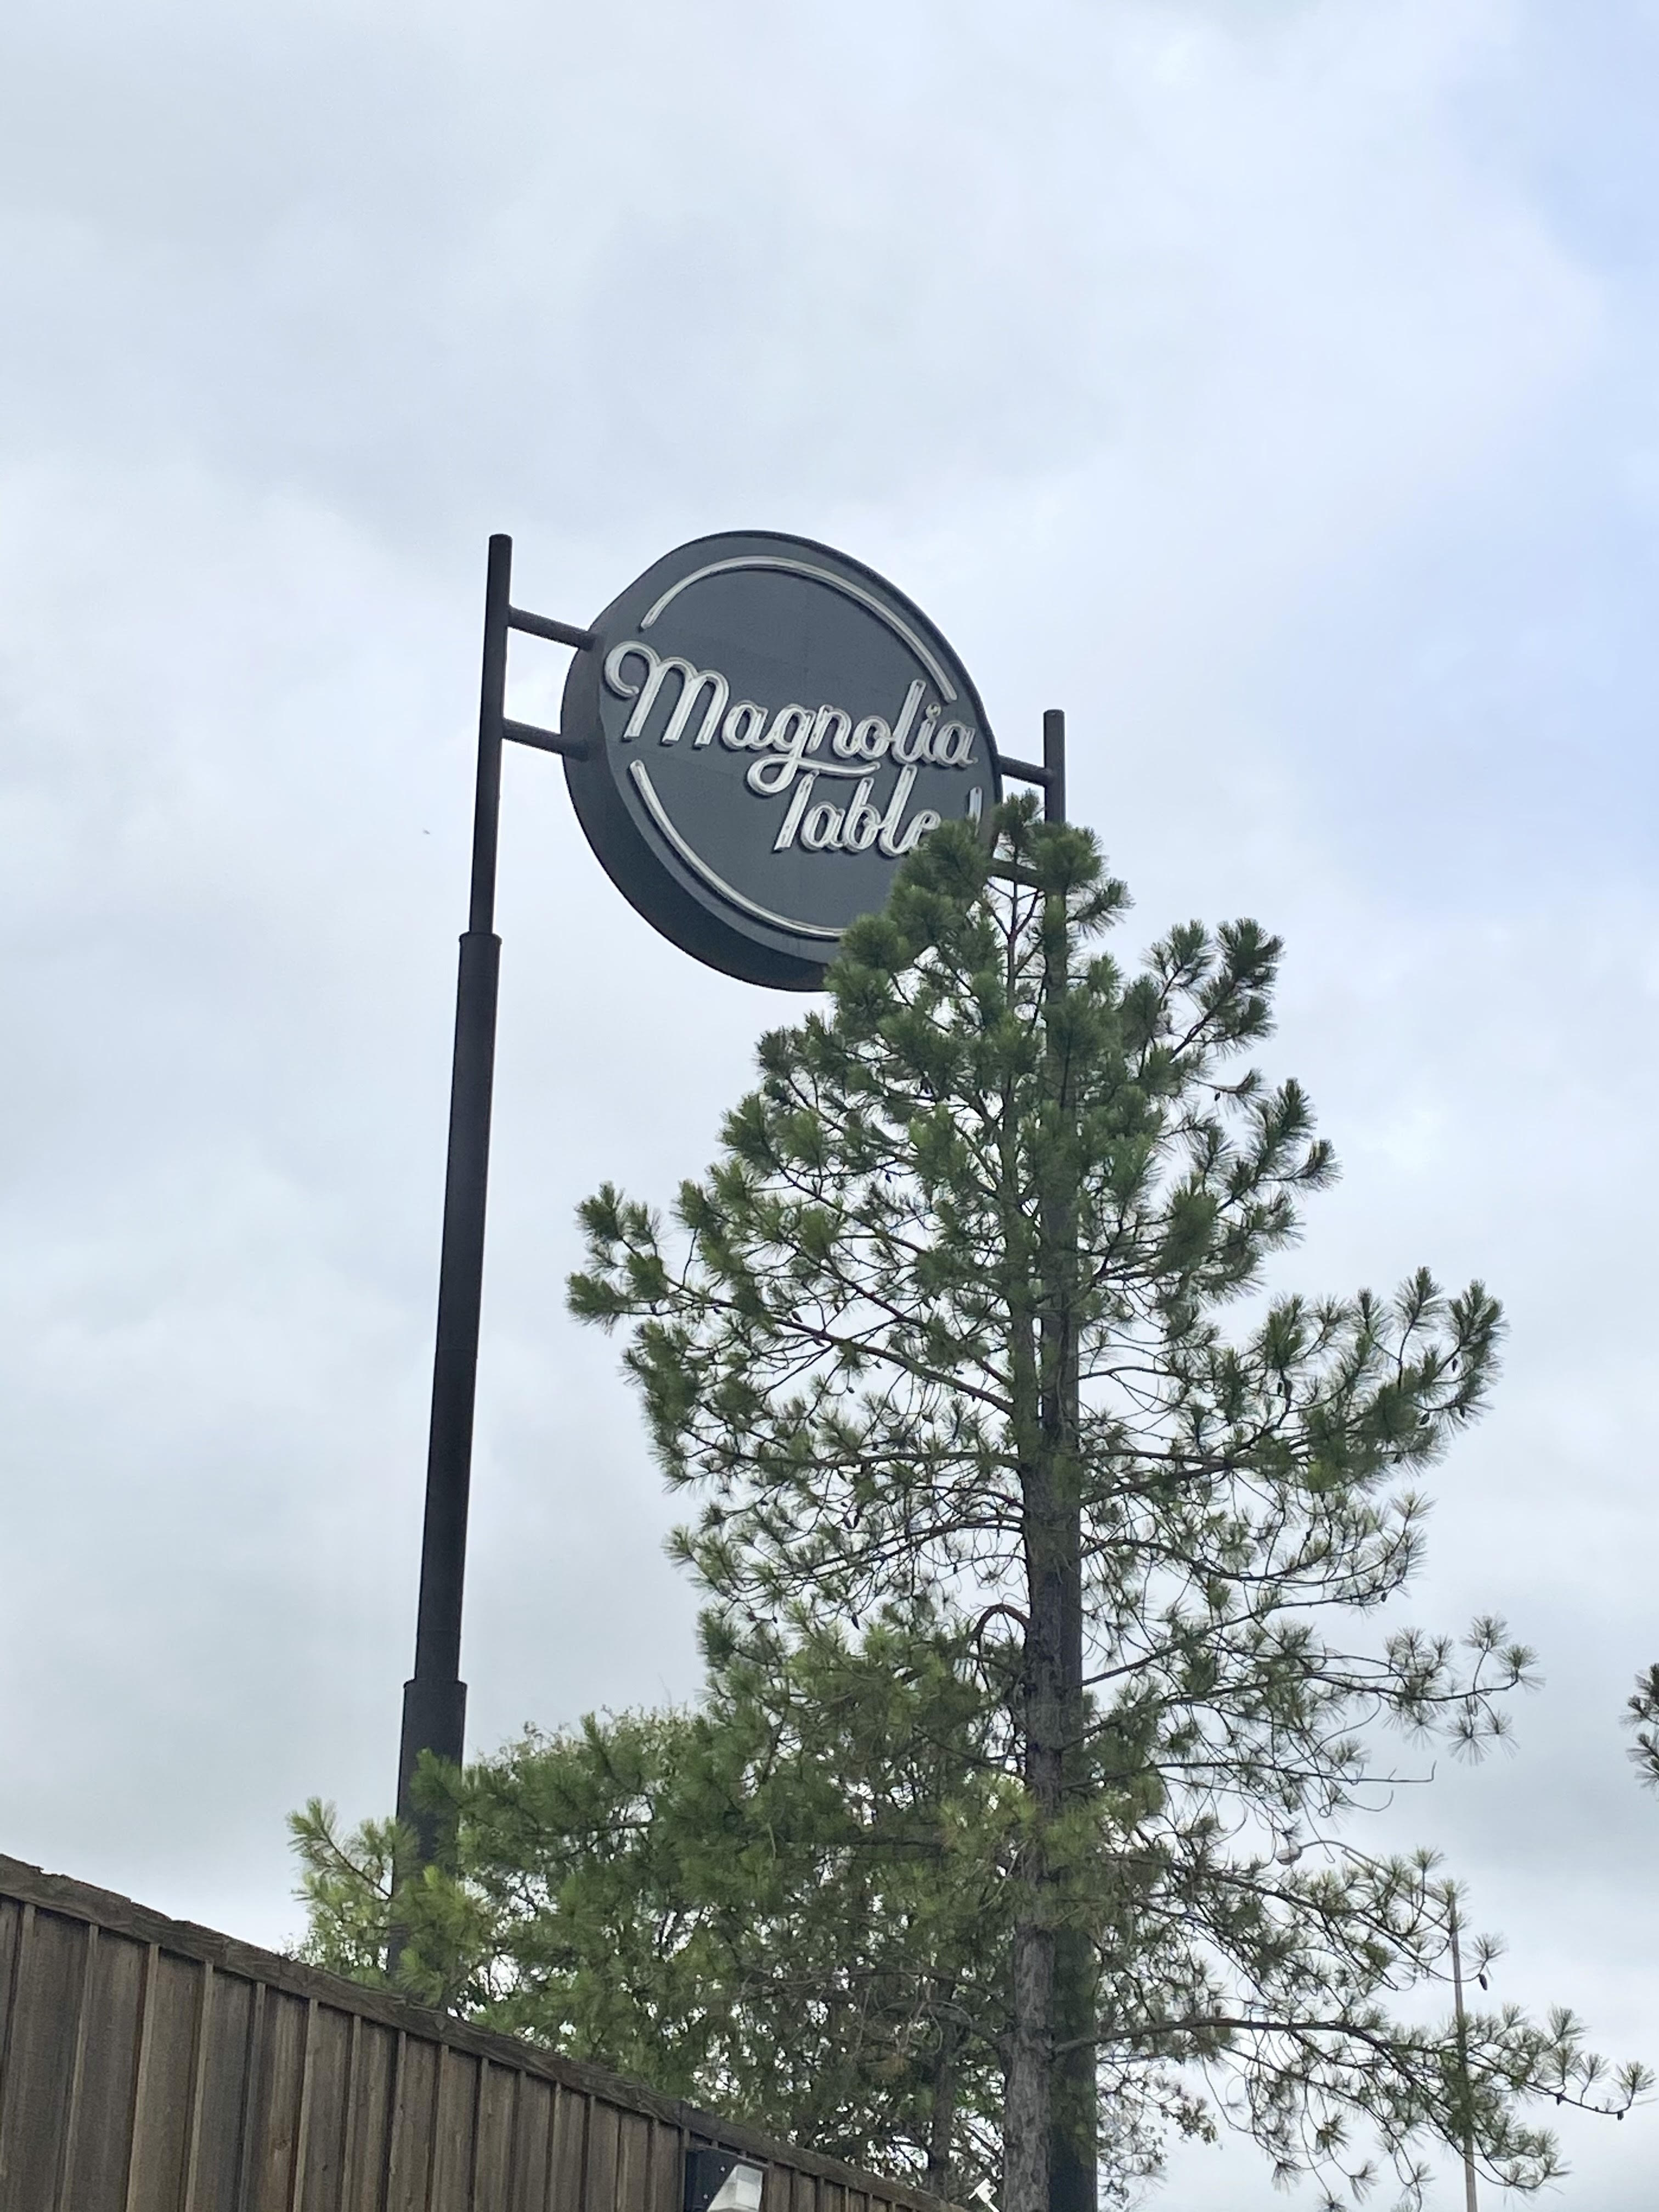 Chip and Joanna Gaines kept some of the historical elements at the Magnolia Table from the Elite Café that fed Waco's locals for 100 years